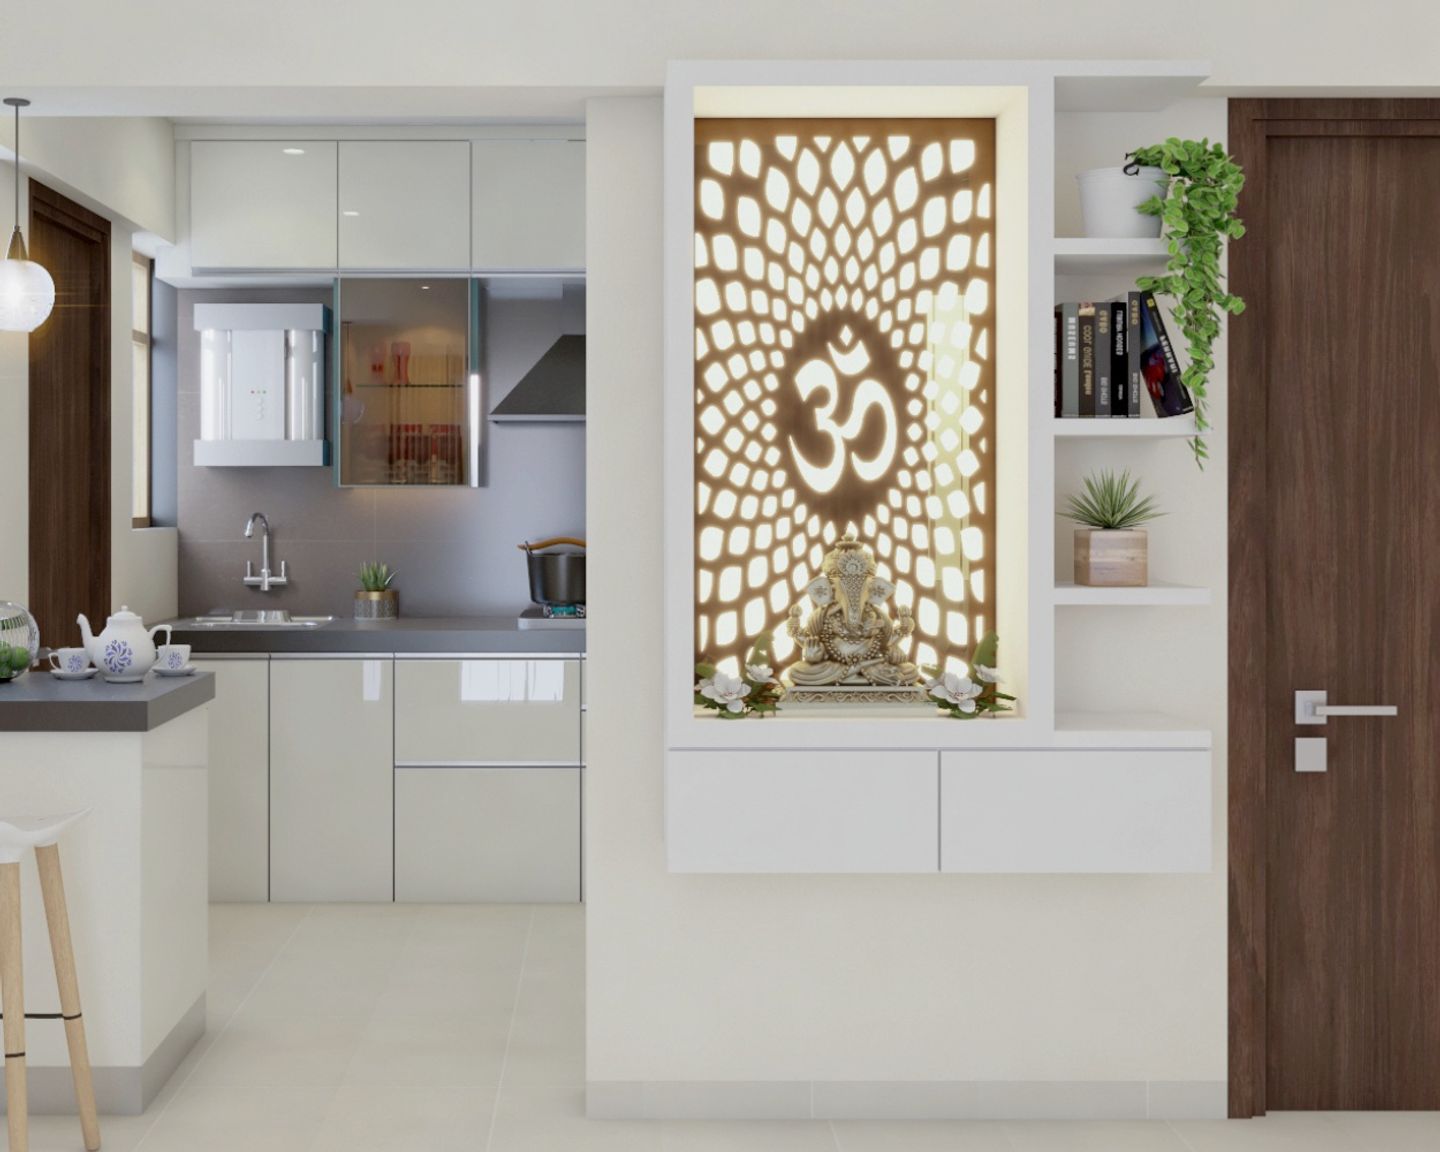 3x1x5 Ft Frosty White Mandir Unit Design With Highlighted Om Back Panel - Livspace